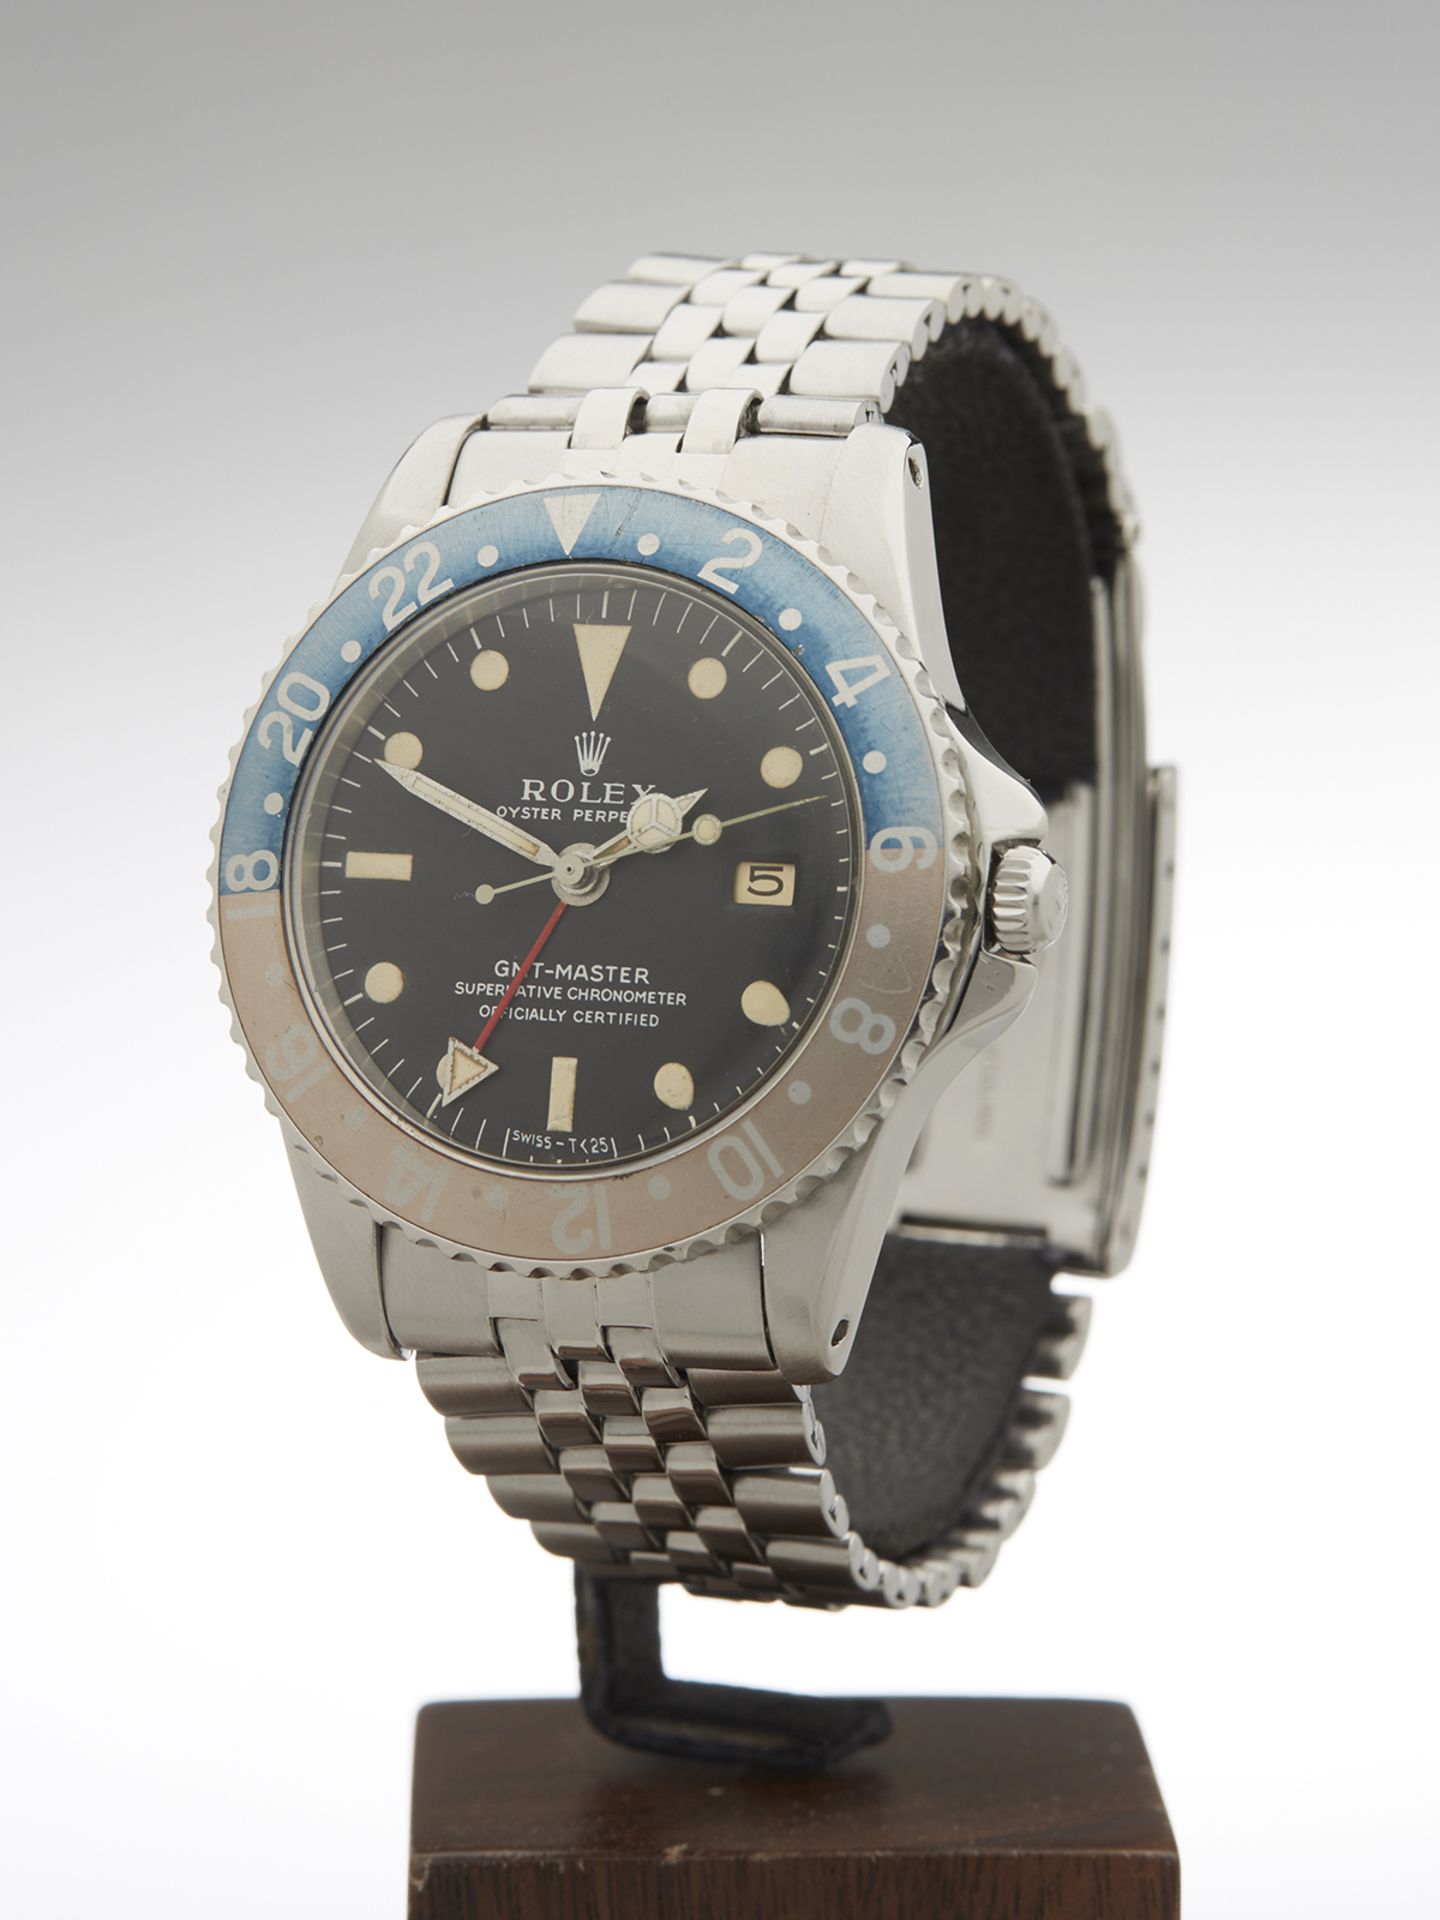 Rare, 1961 Rolex, GMT-Master Pointed Crown Guards, Matt Dial 40mm Stainless Steel 1675